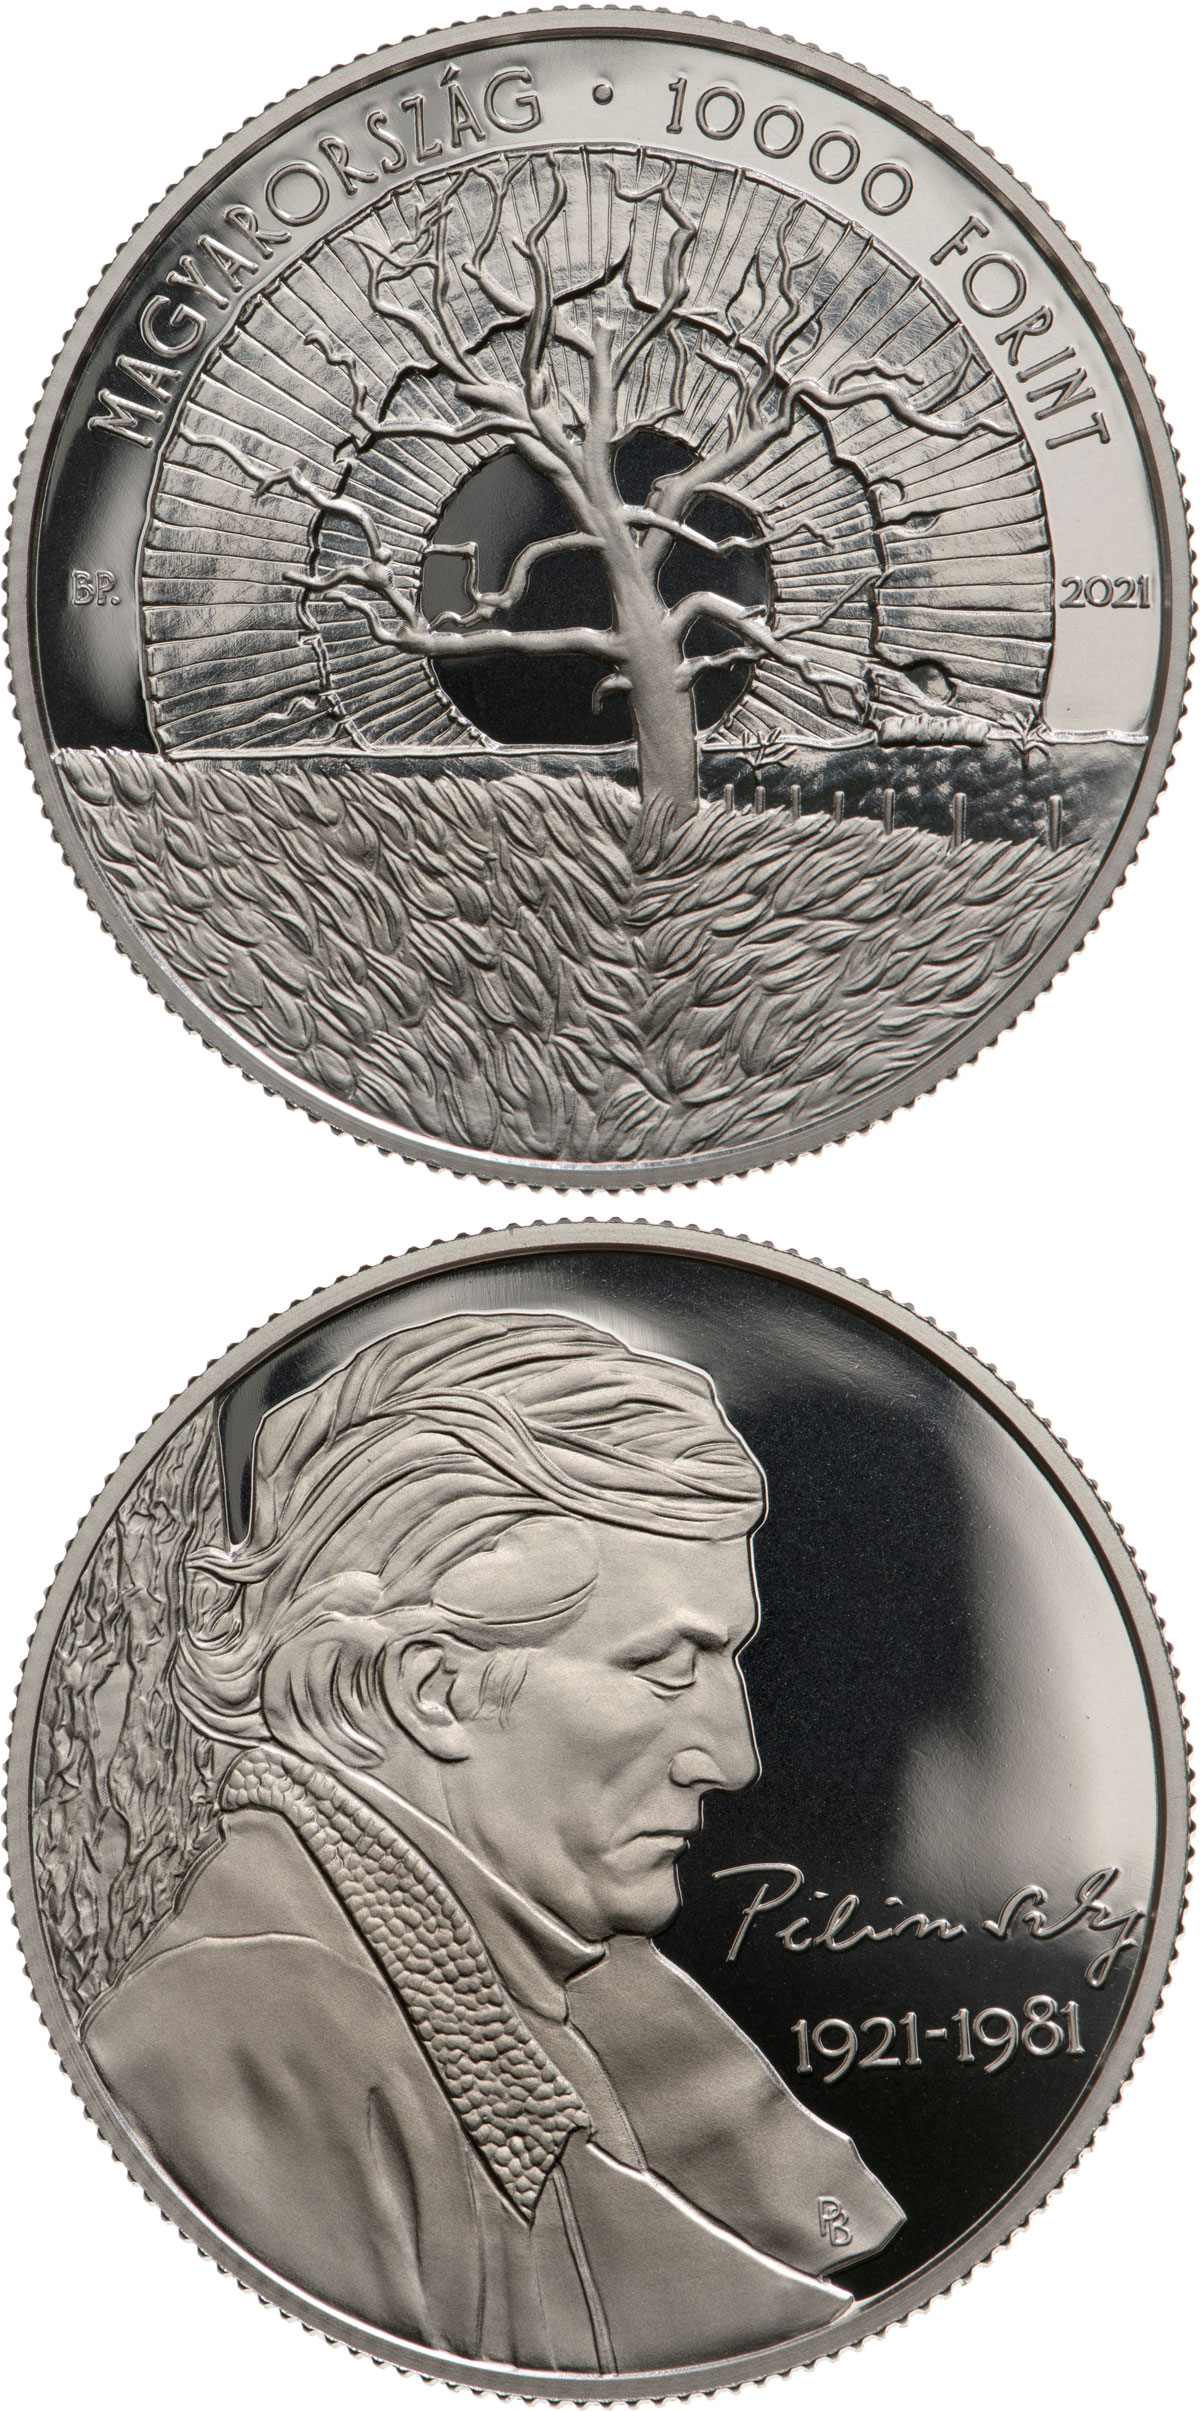 Image of 10000 forint coin - János Pilinszky | Hungary 2021.  The Silver coin is of Proof quality.